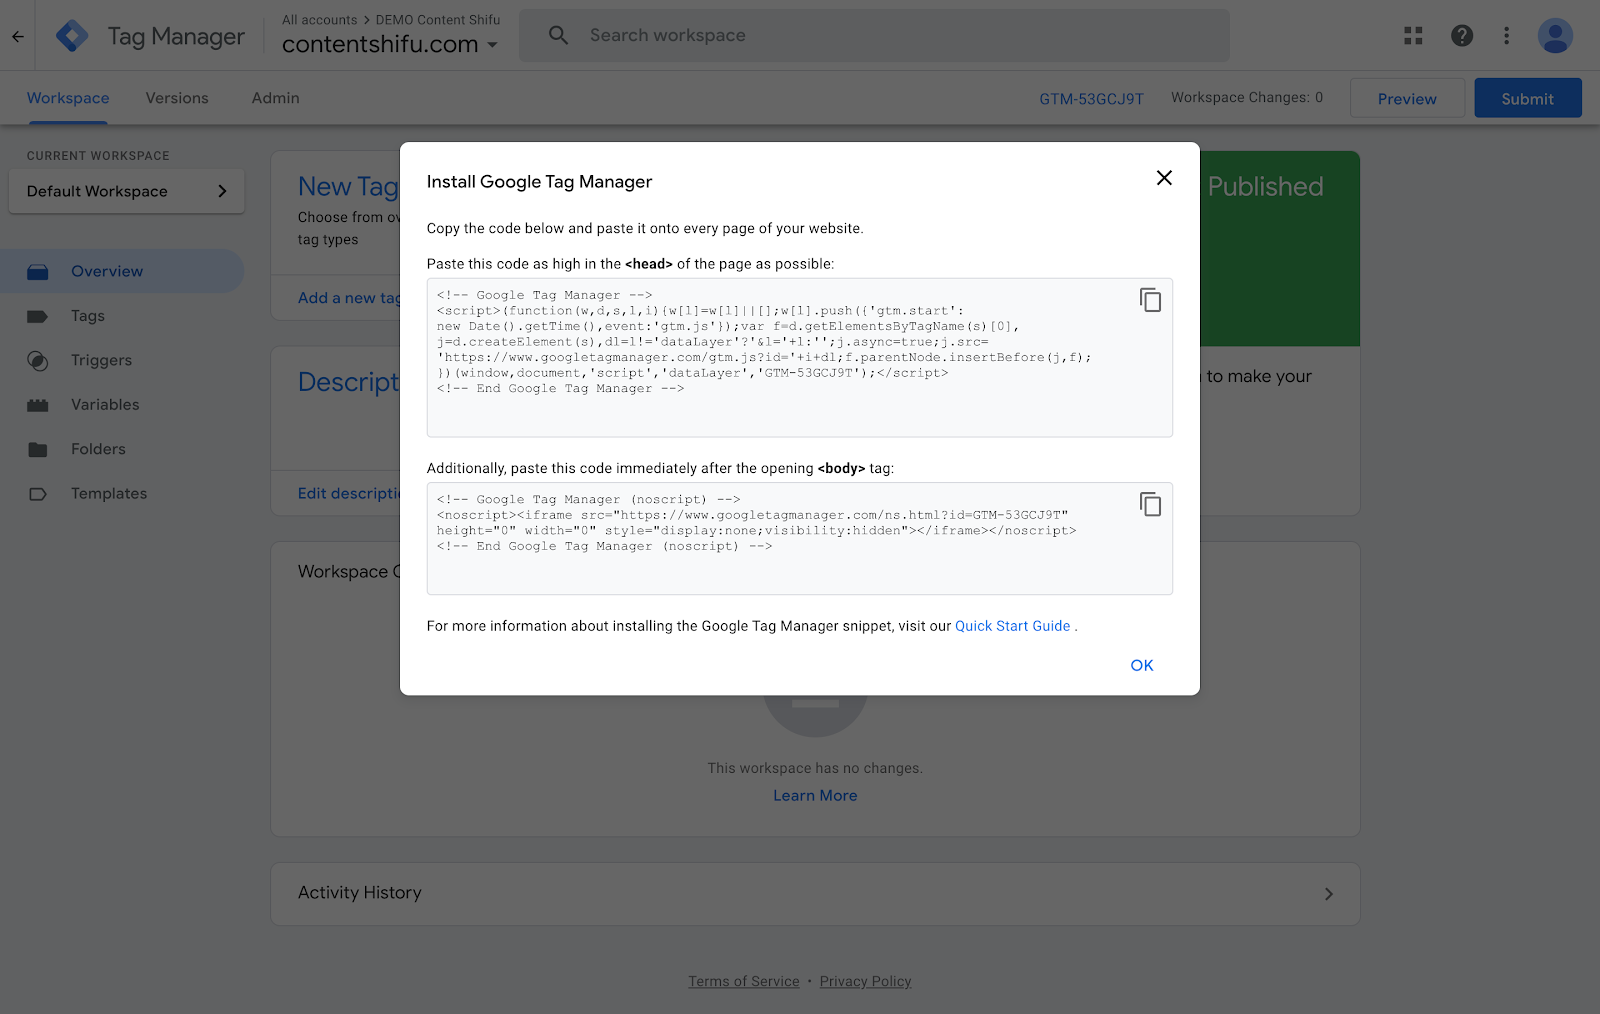 Google Tag Manager Code